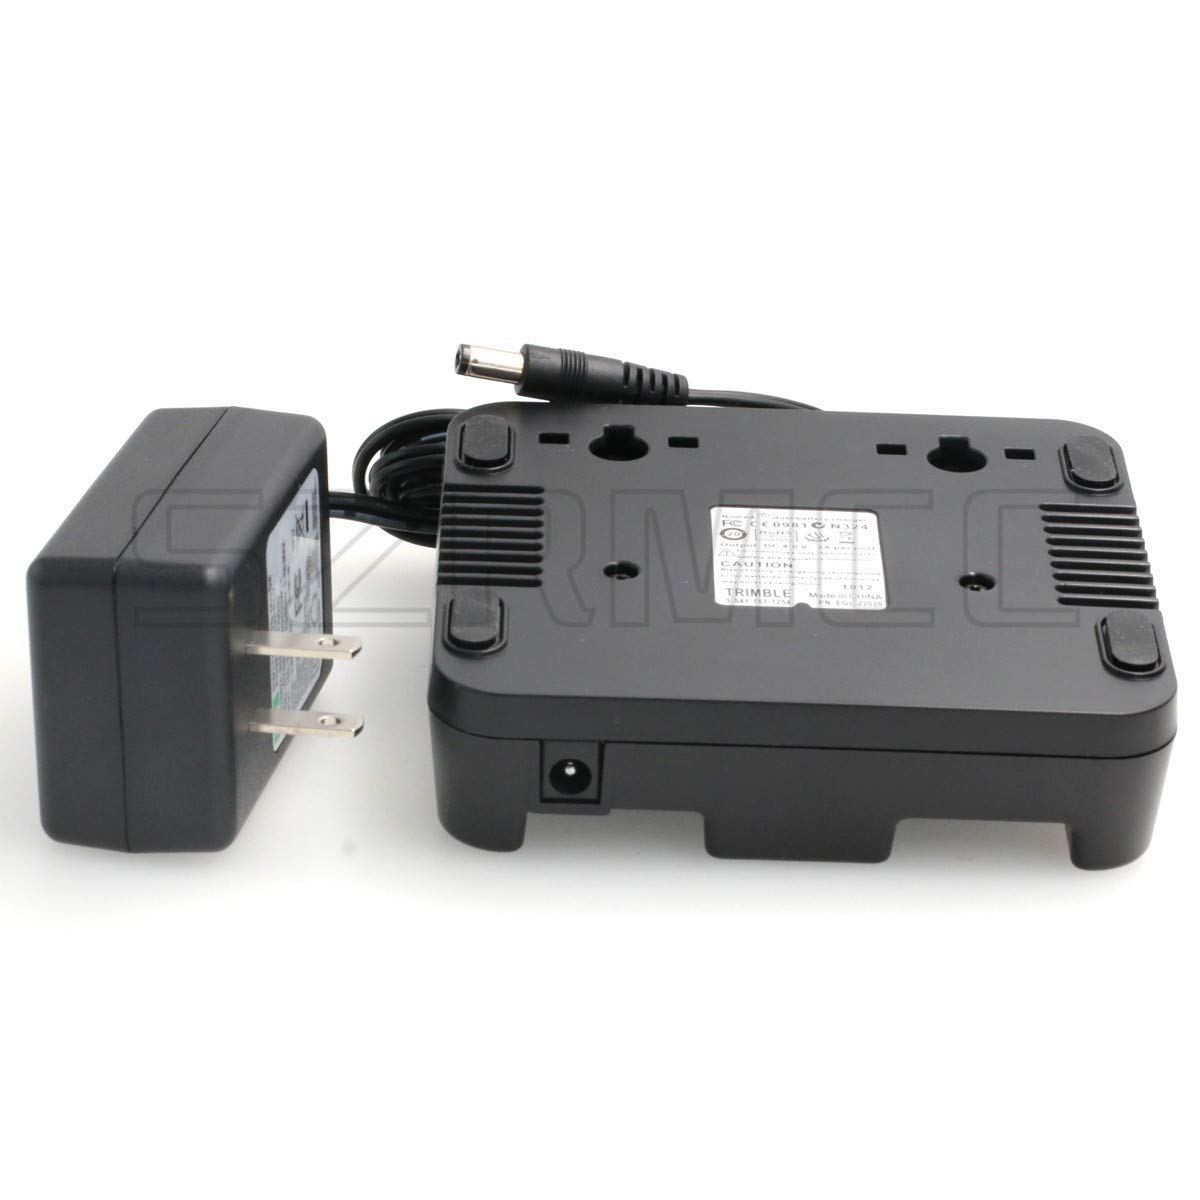 SZRMCC 2M Battery Dual Charger for Nikon NIVO 2M/2C Series DPL-322 Total Station Nivo C/M Battery Charger